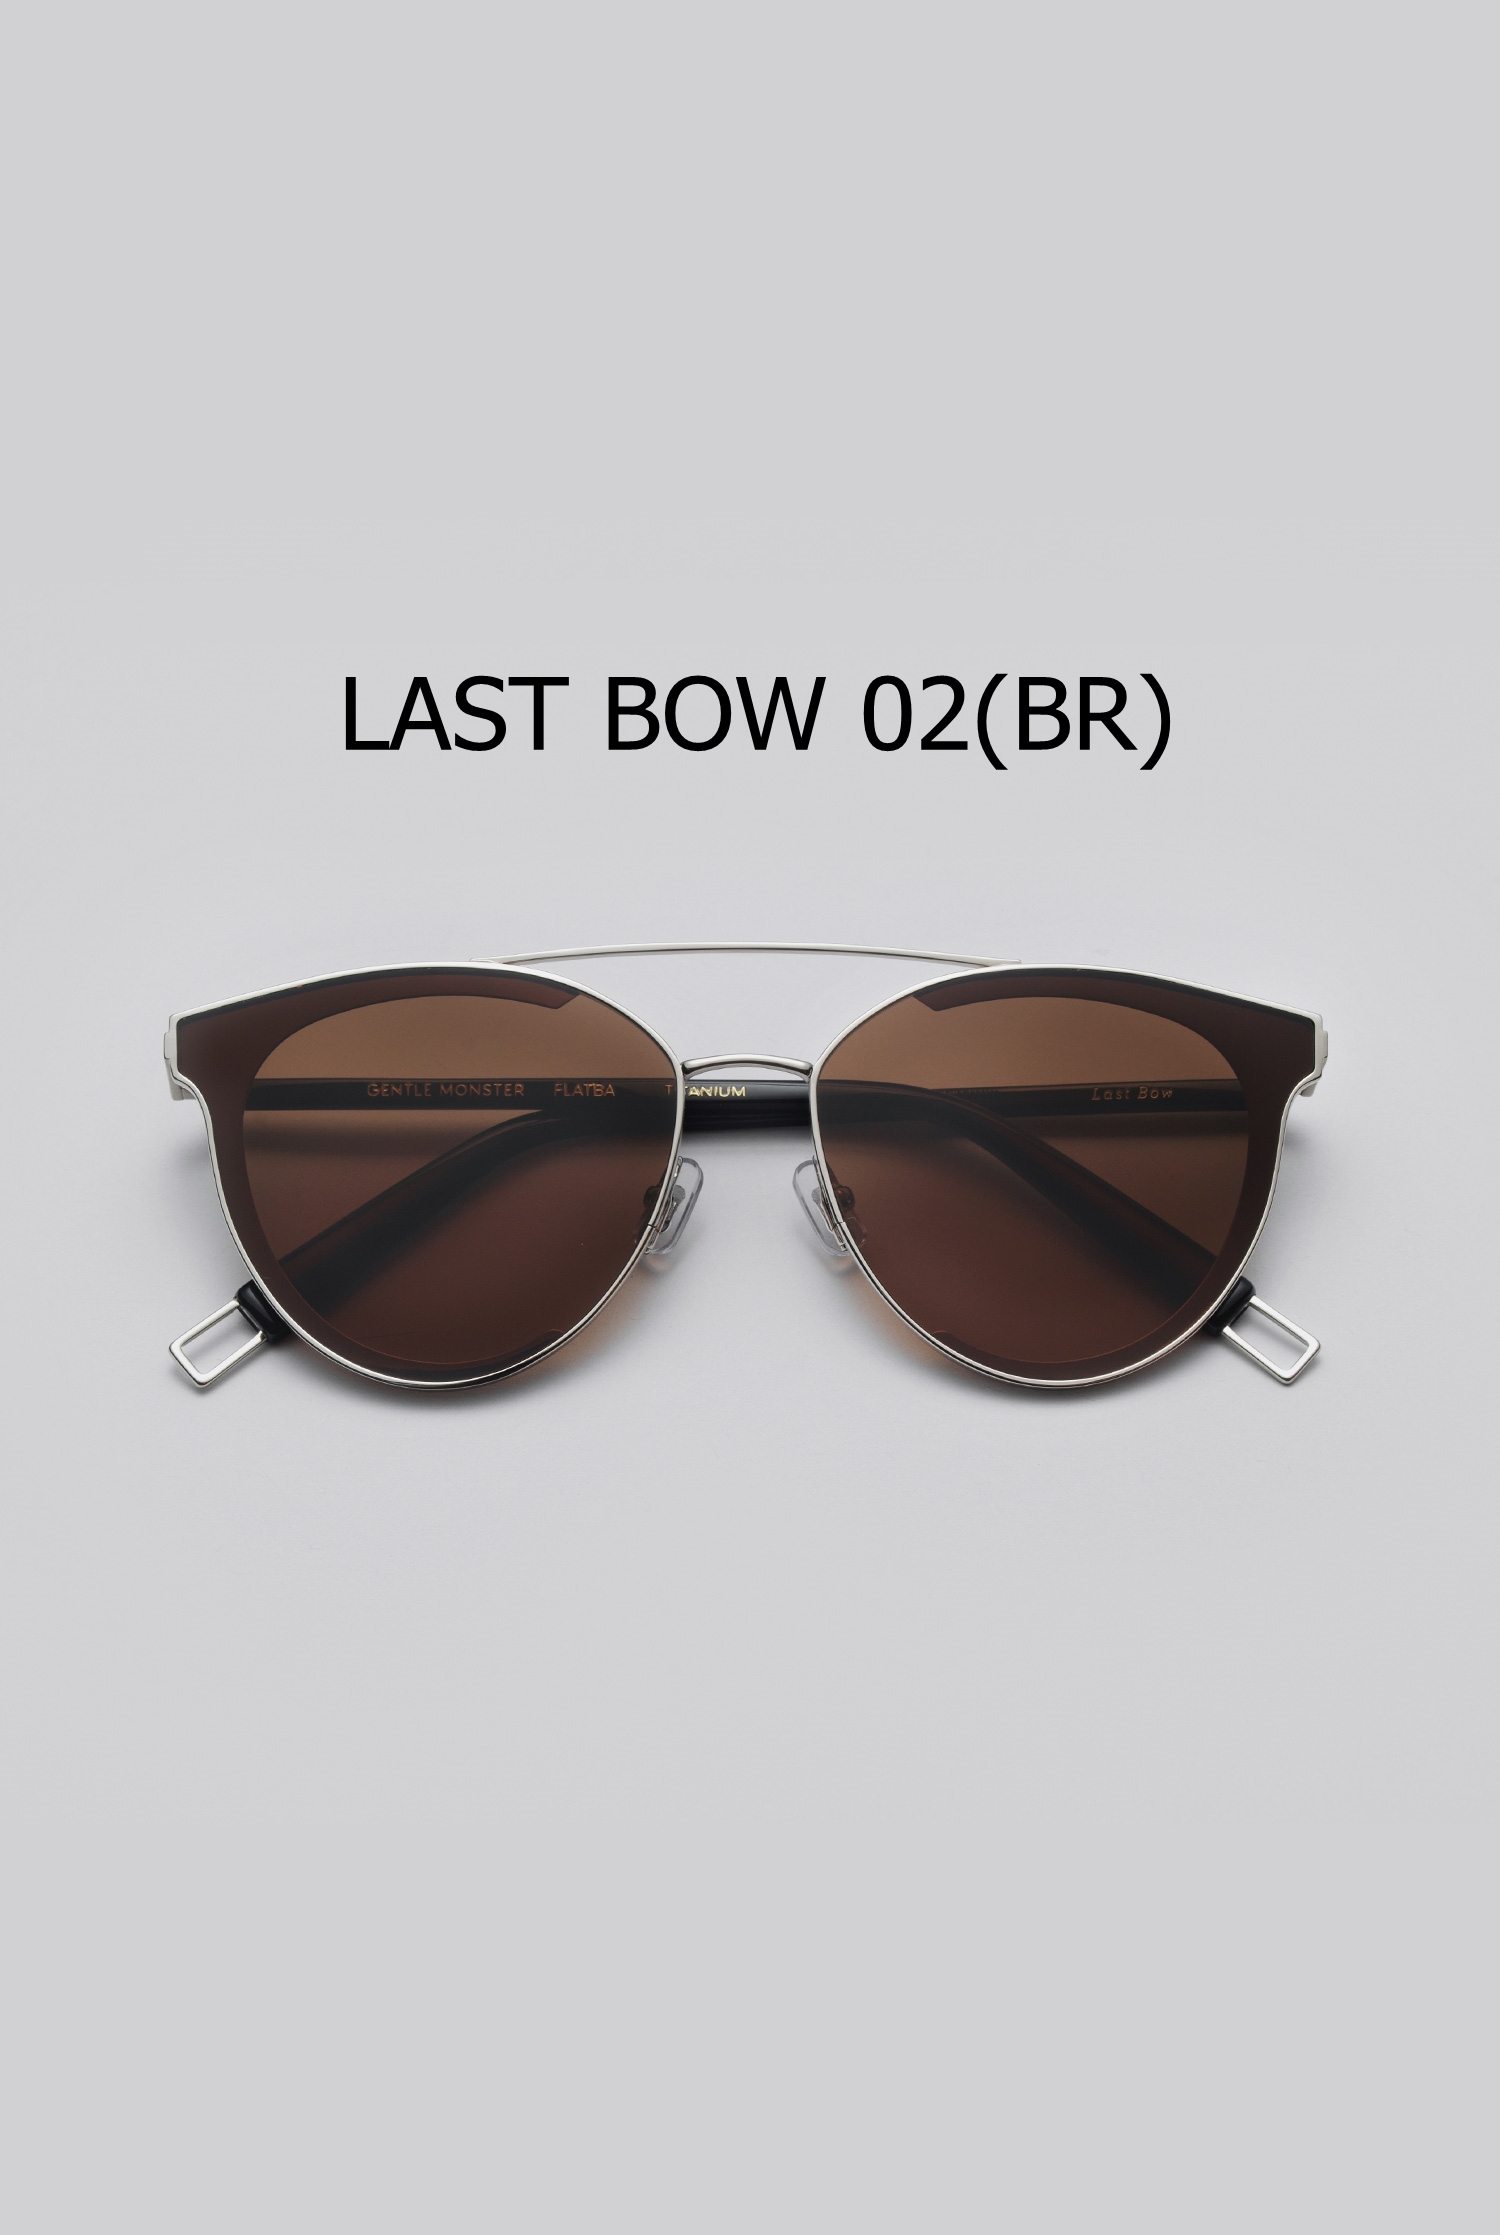 LAST BOW 02(BR)